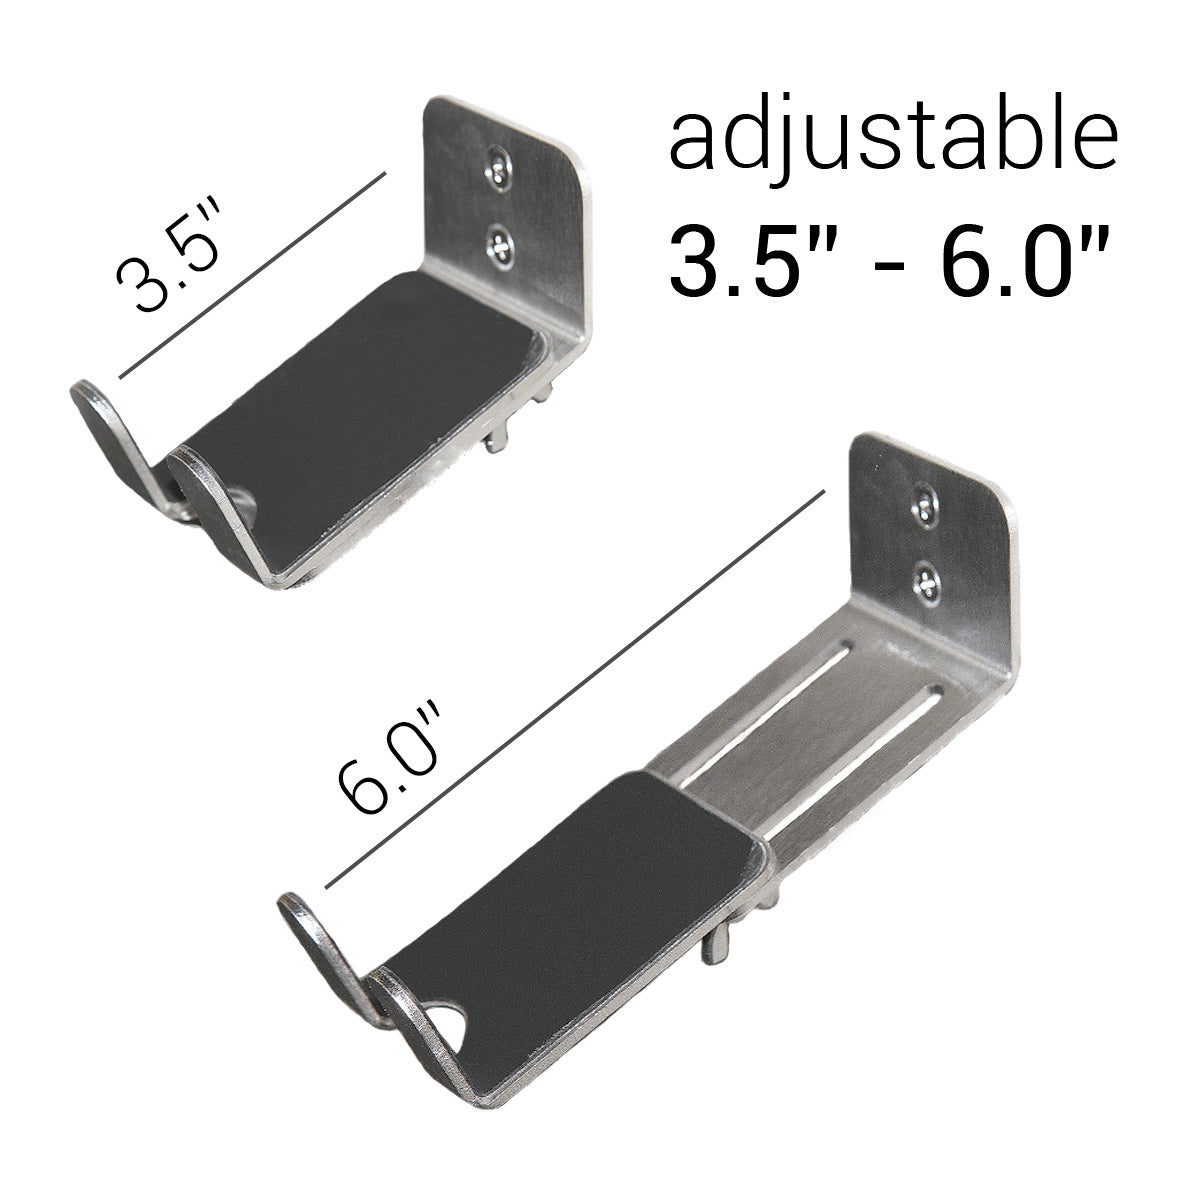 Stainless Steel Adjustable Bike Pedal Wall Mount